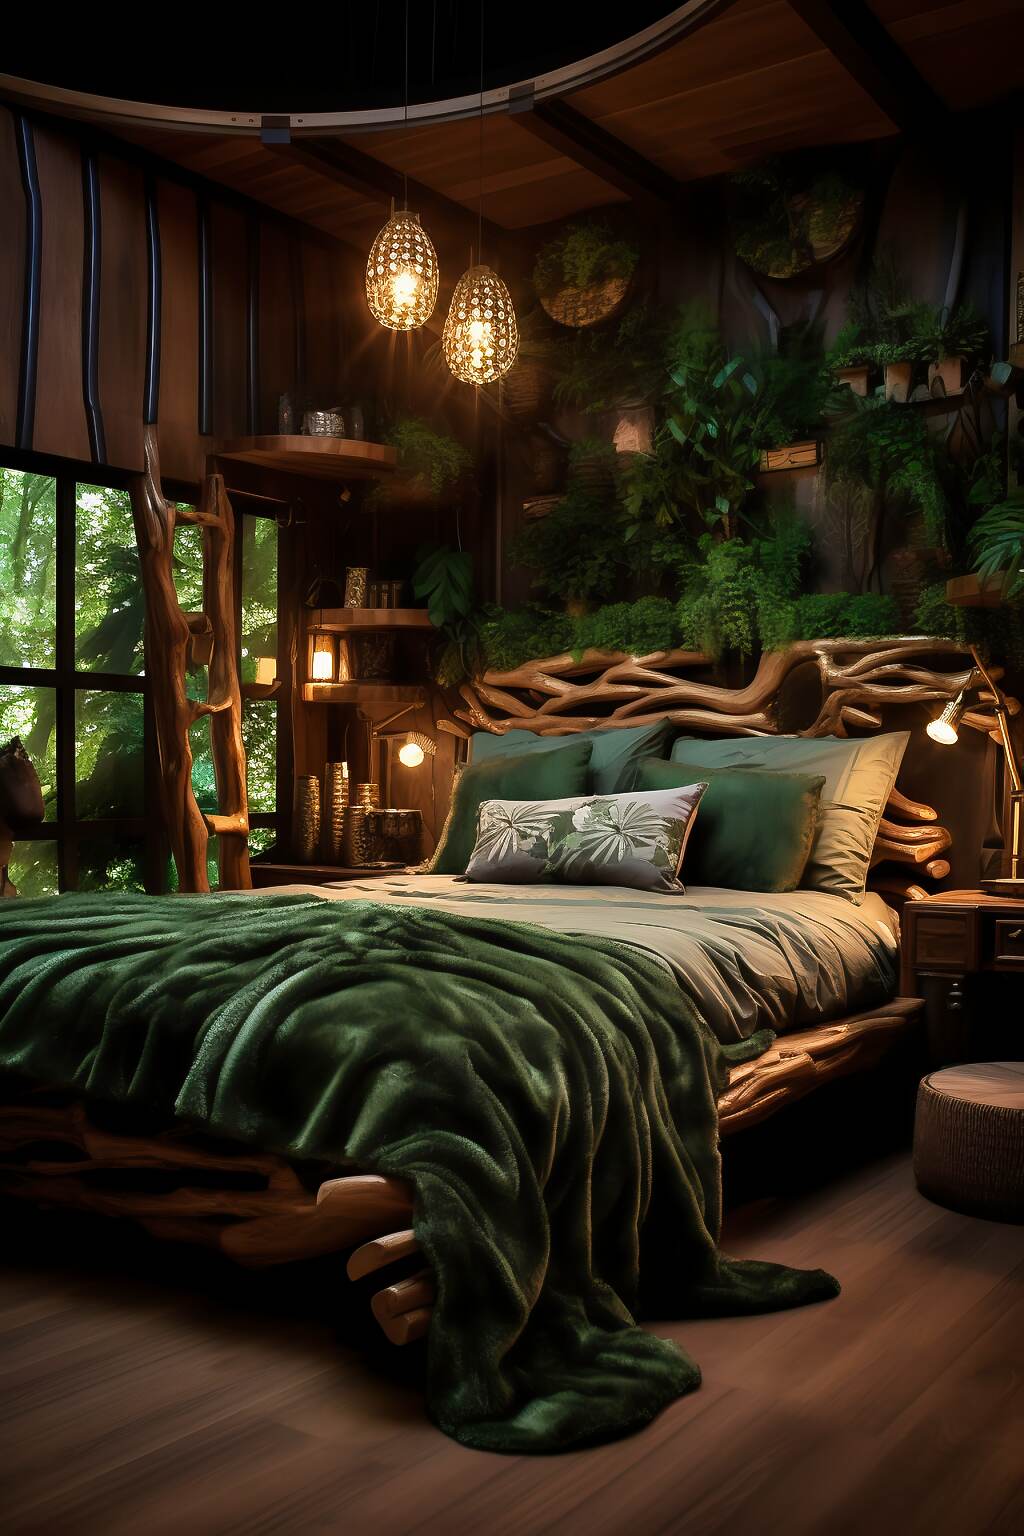 Medium-Sized Dark Boho Bedroom With A Green &Amp; Brown Color Scheme, Featuring Tree Murals, Wooden Furniture, And Forest Art, Creating A Magical And Enchanting Atmosphere.